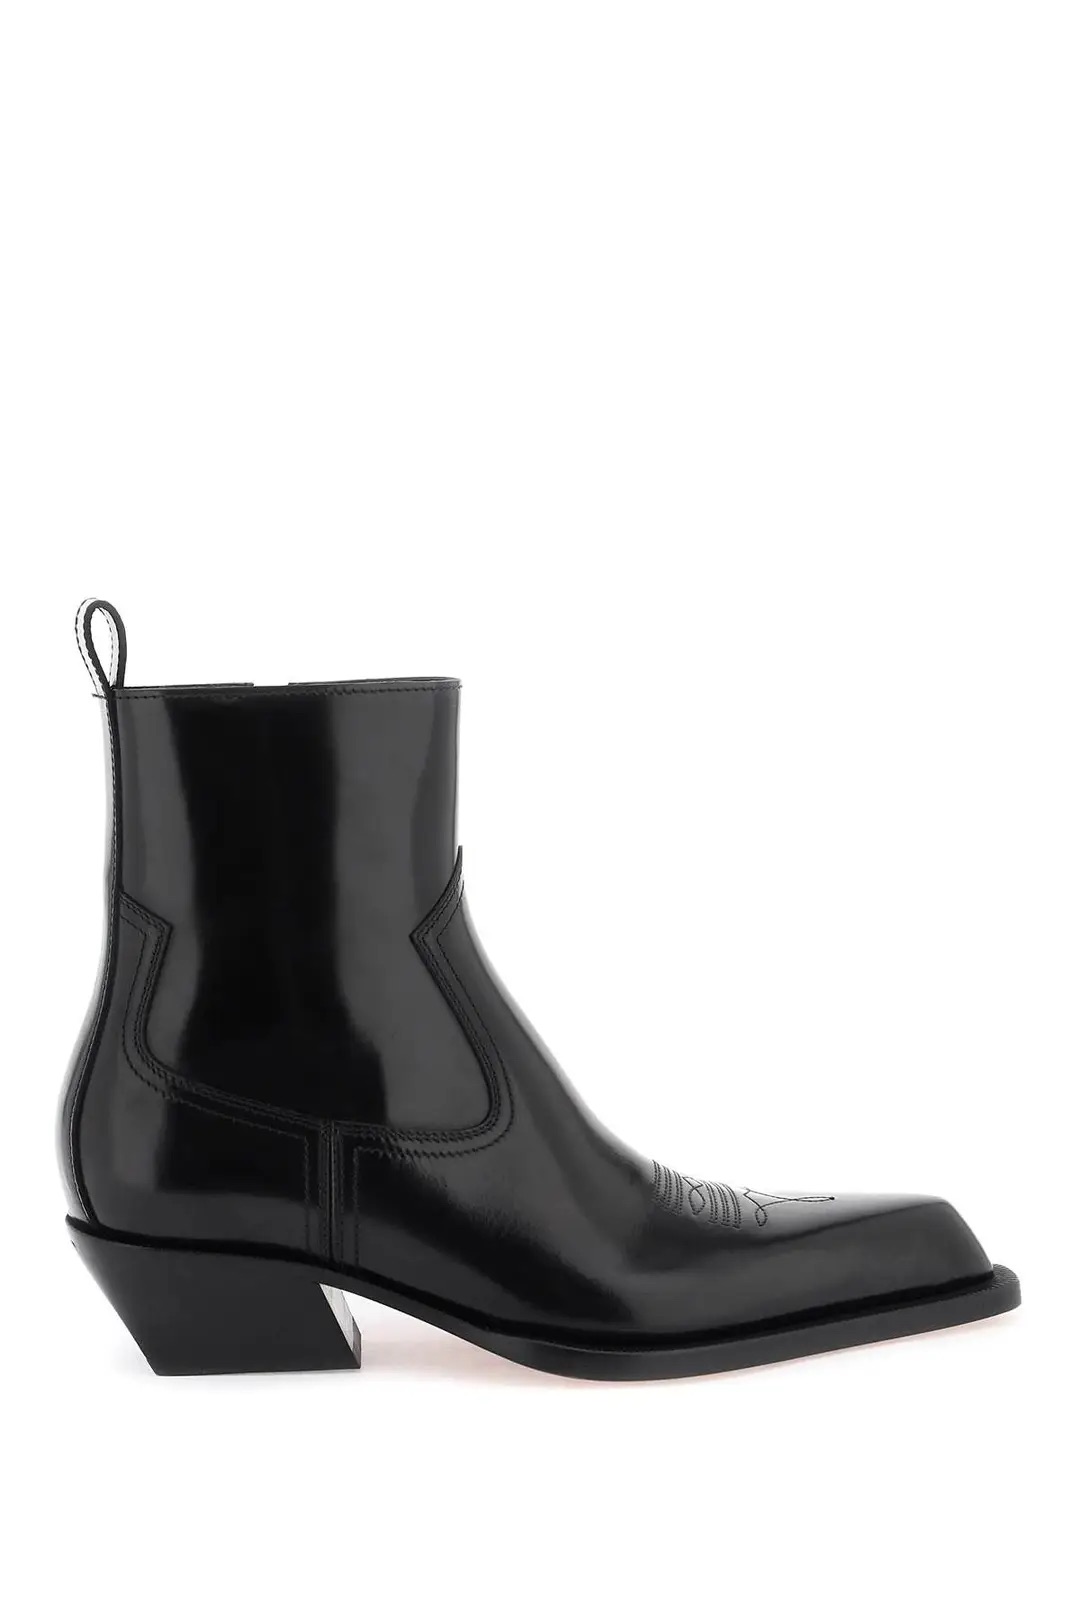 OFF-WHITE leather texan ankle boots - Woman | Residenza 725